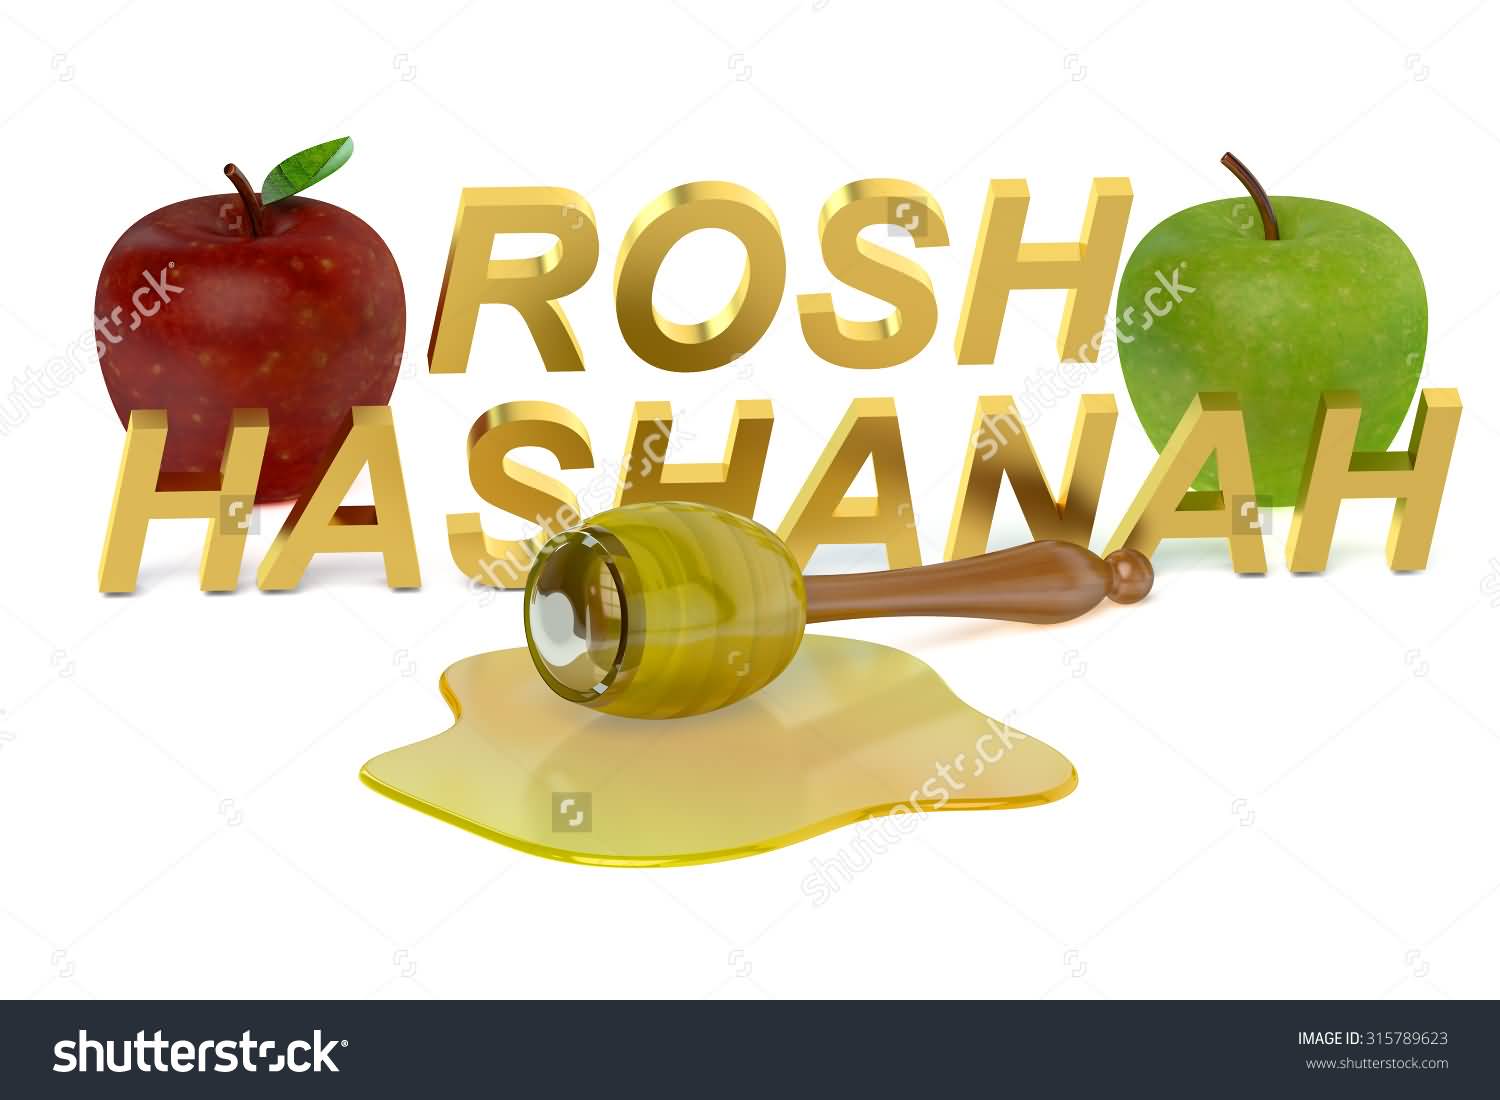 Rosh Hashanah Wishes Stick Covered With Honey And Fruits Picture